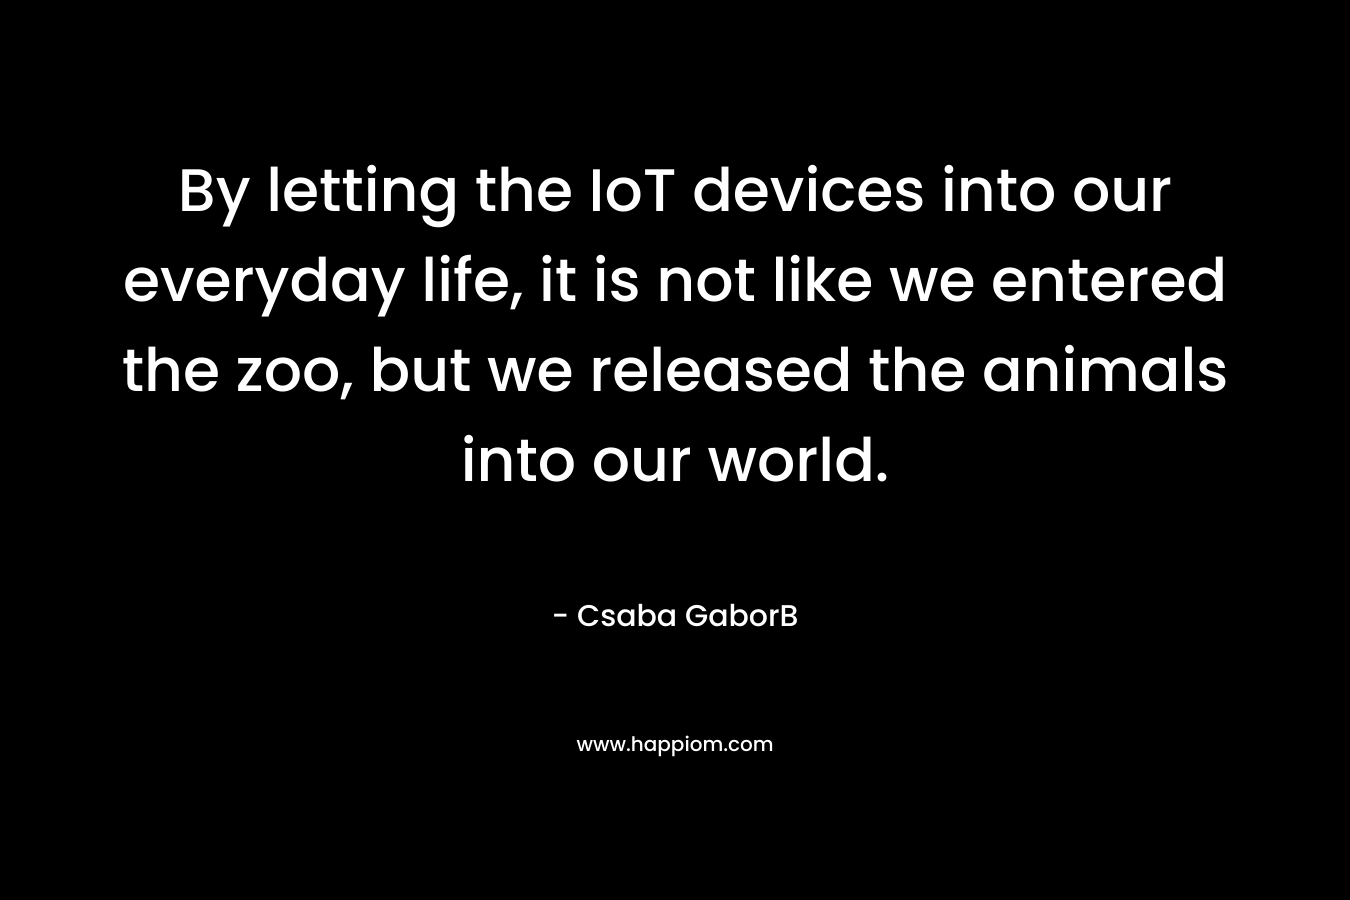 By letting the IoT devices into our everyday life, it is not like we entered the zoo, but we released the animals into our world. – Csaba GaborB